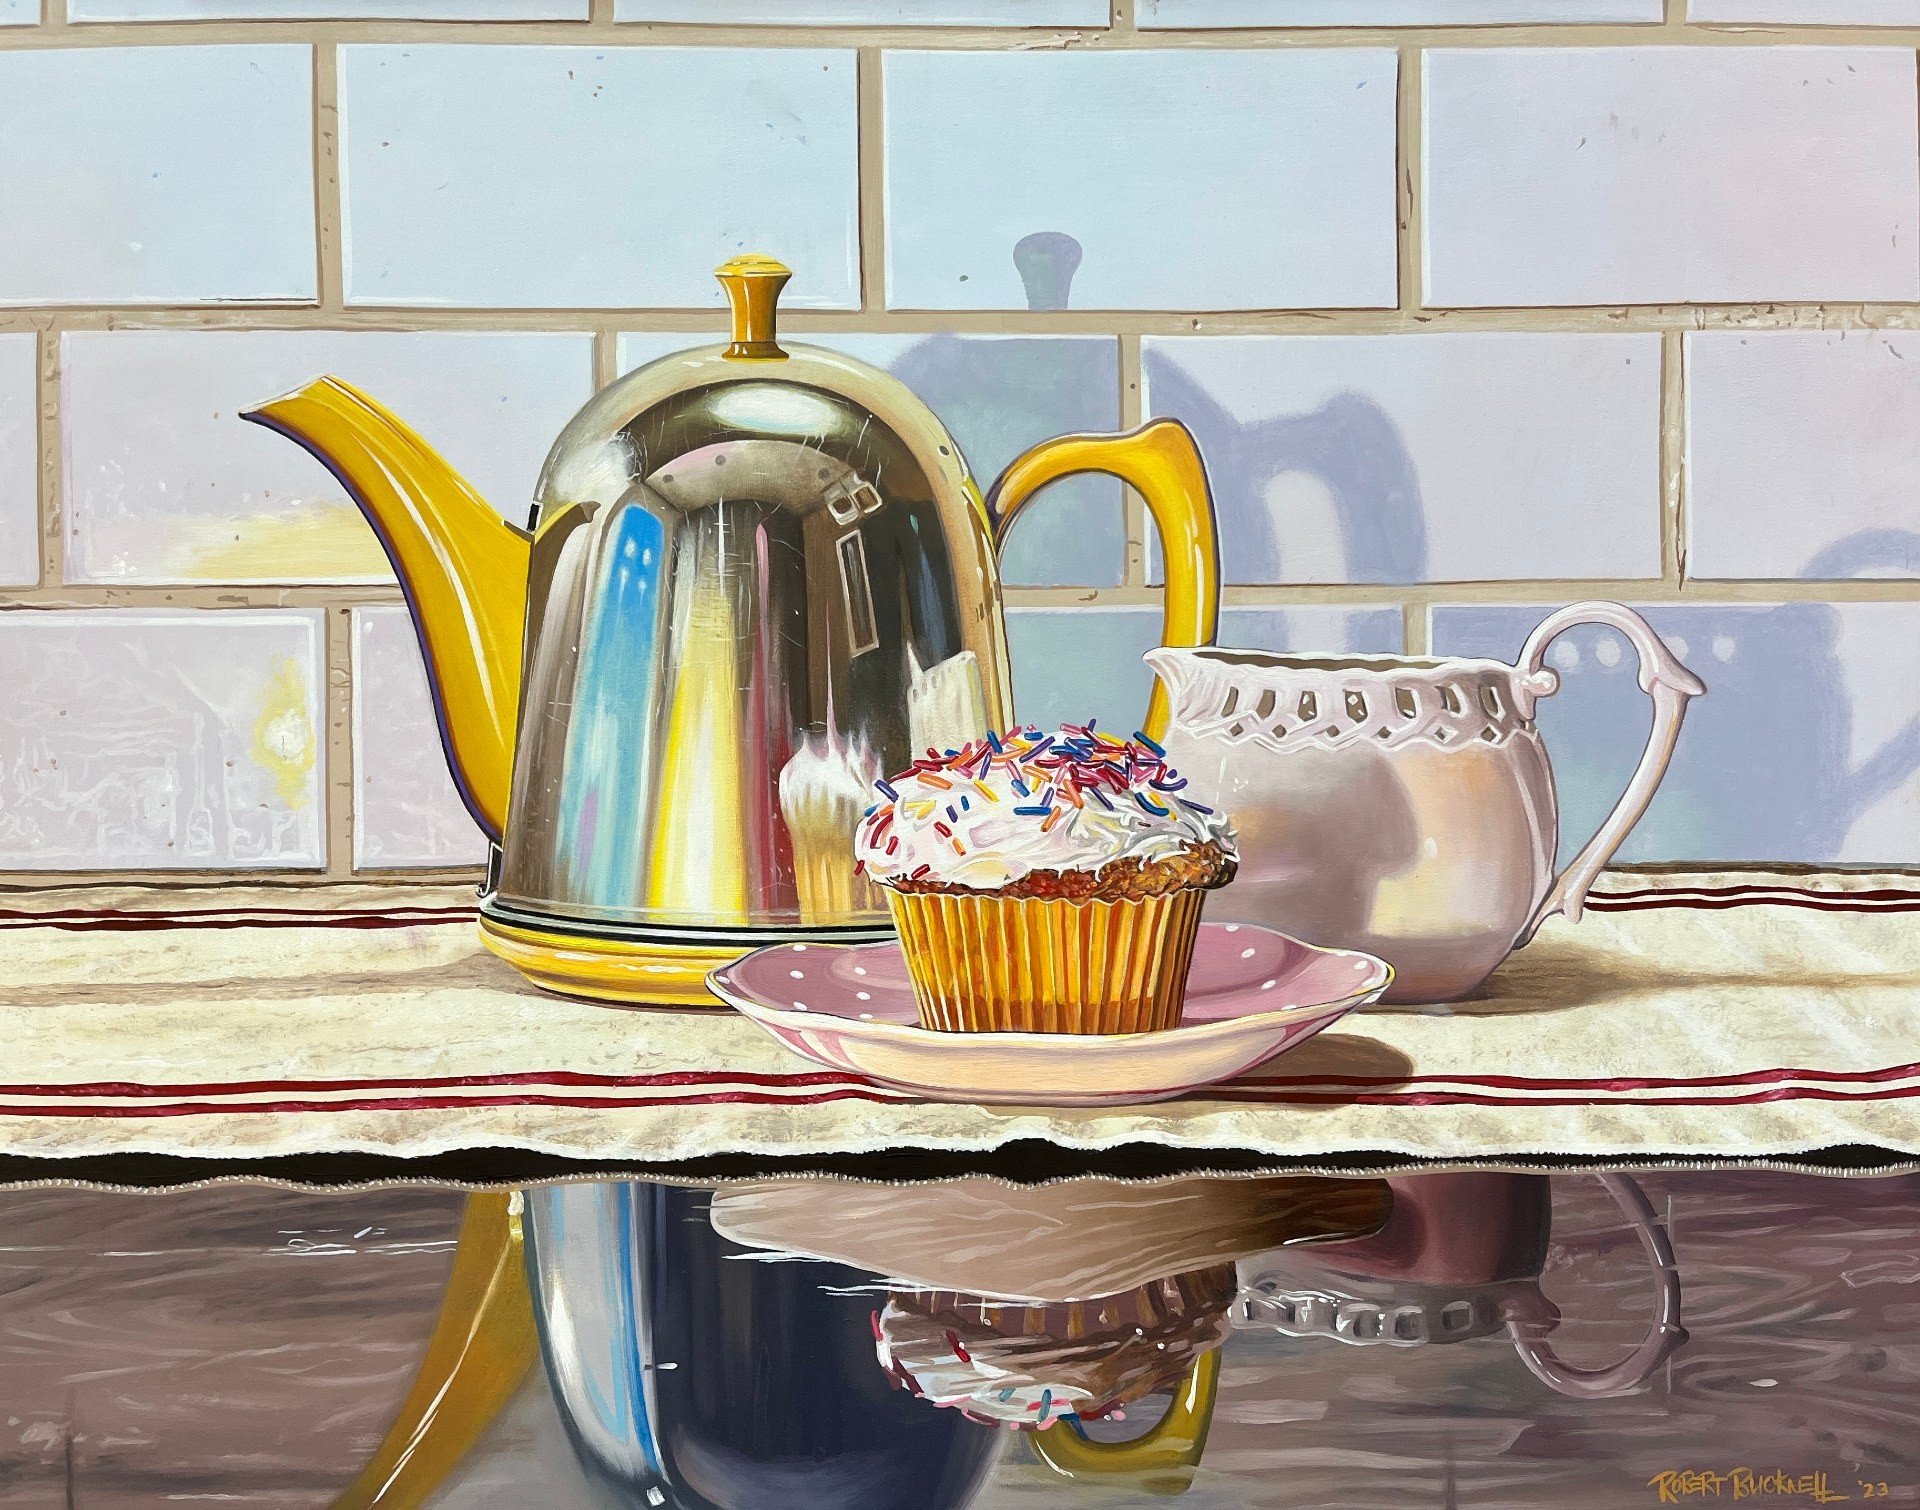 Robert Bucknell (Carson City, Nevada), “Afternoon Tea,” Oil, 18x24 in., Second Place Overall, $300 Cash Prize